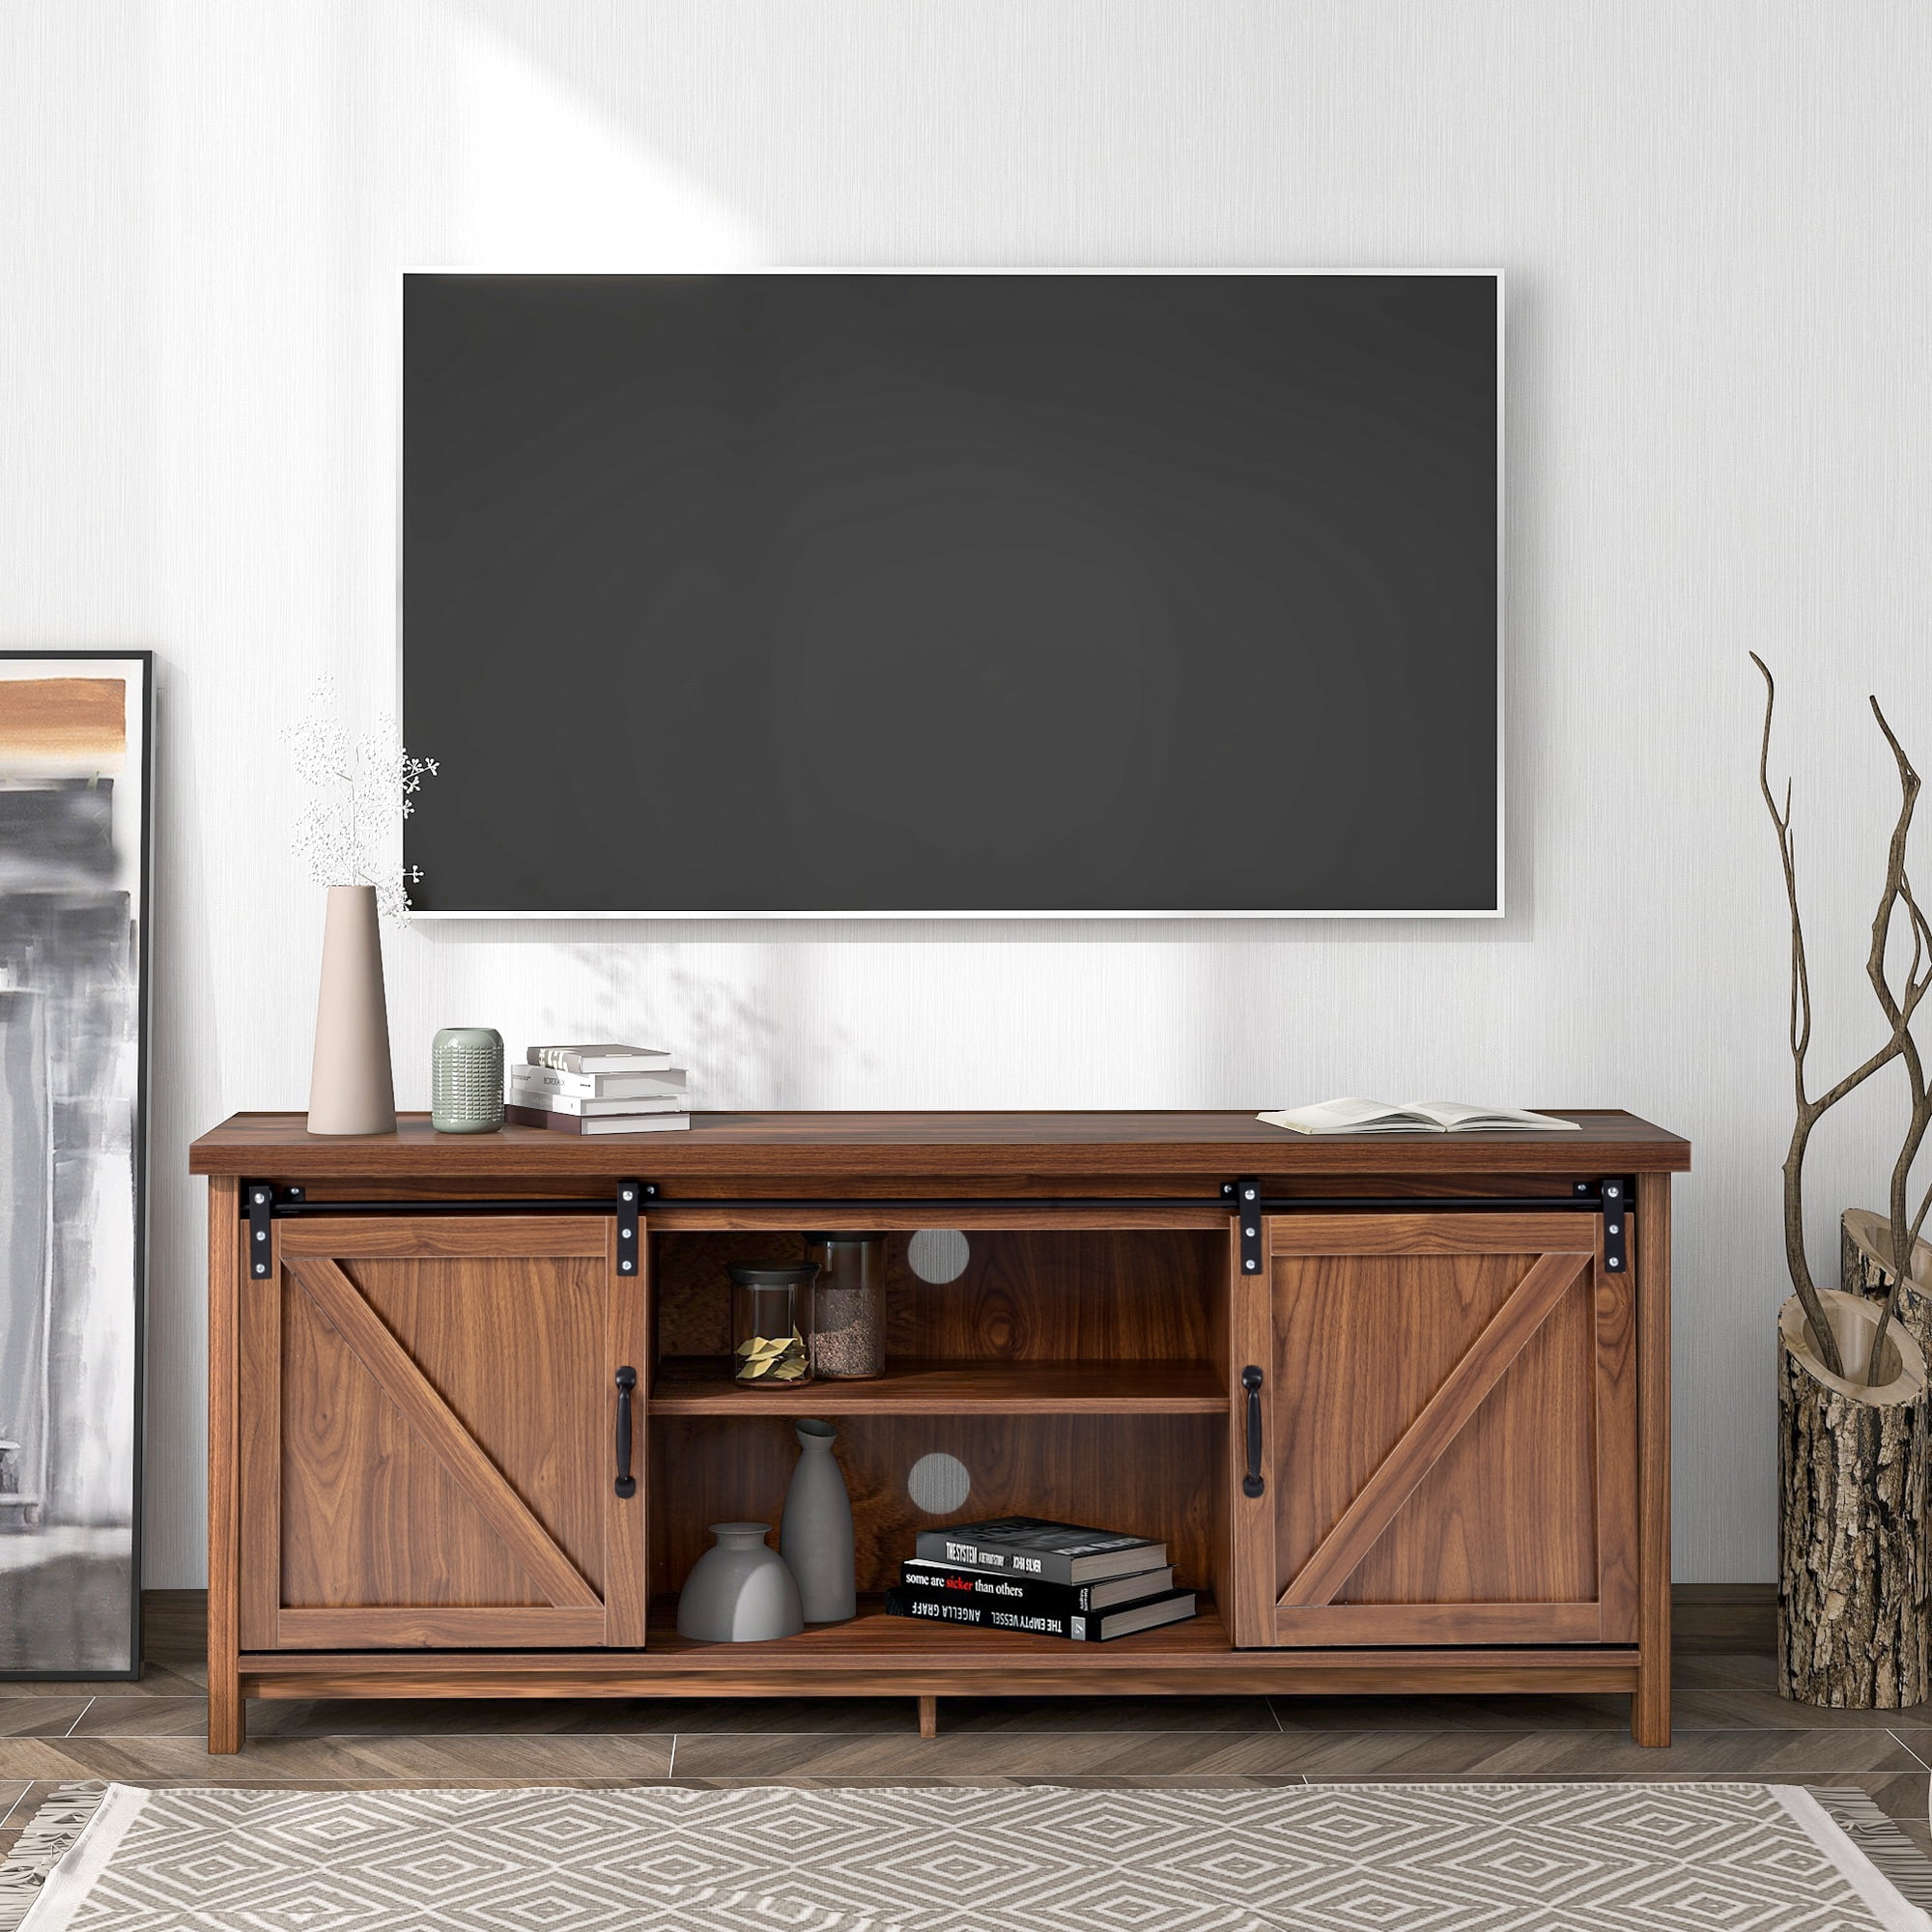 Details about   Rustic Farmhouse Sliding Barn Door TV Stand Console Table Storage for Up To 55" 